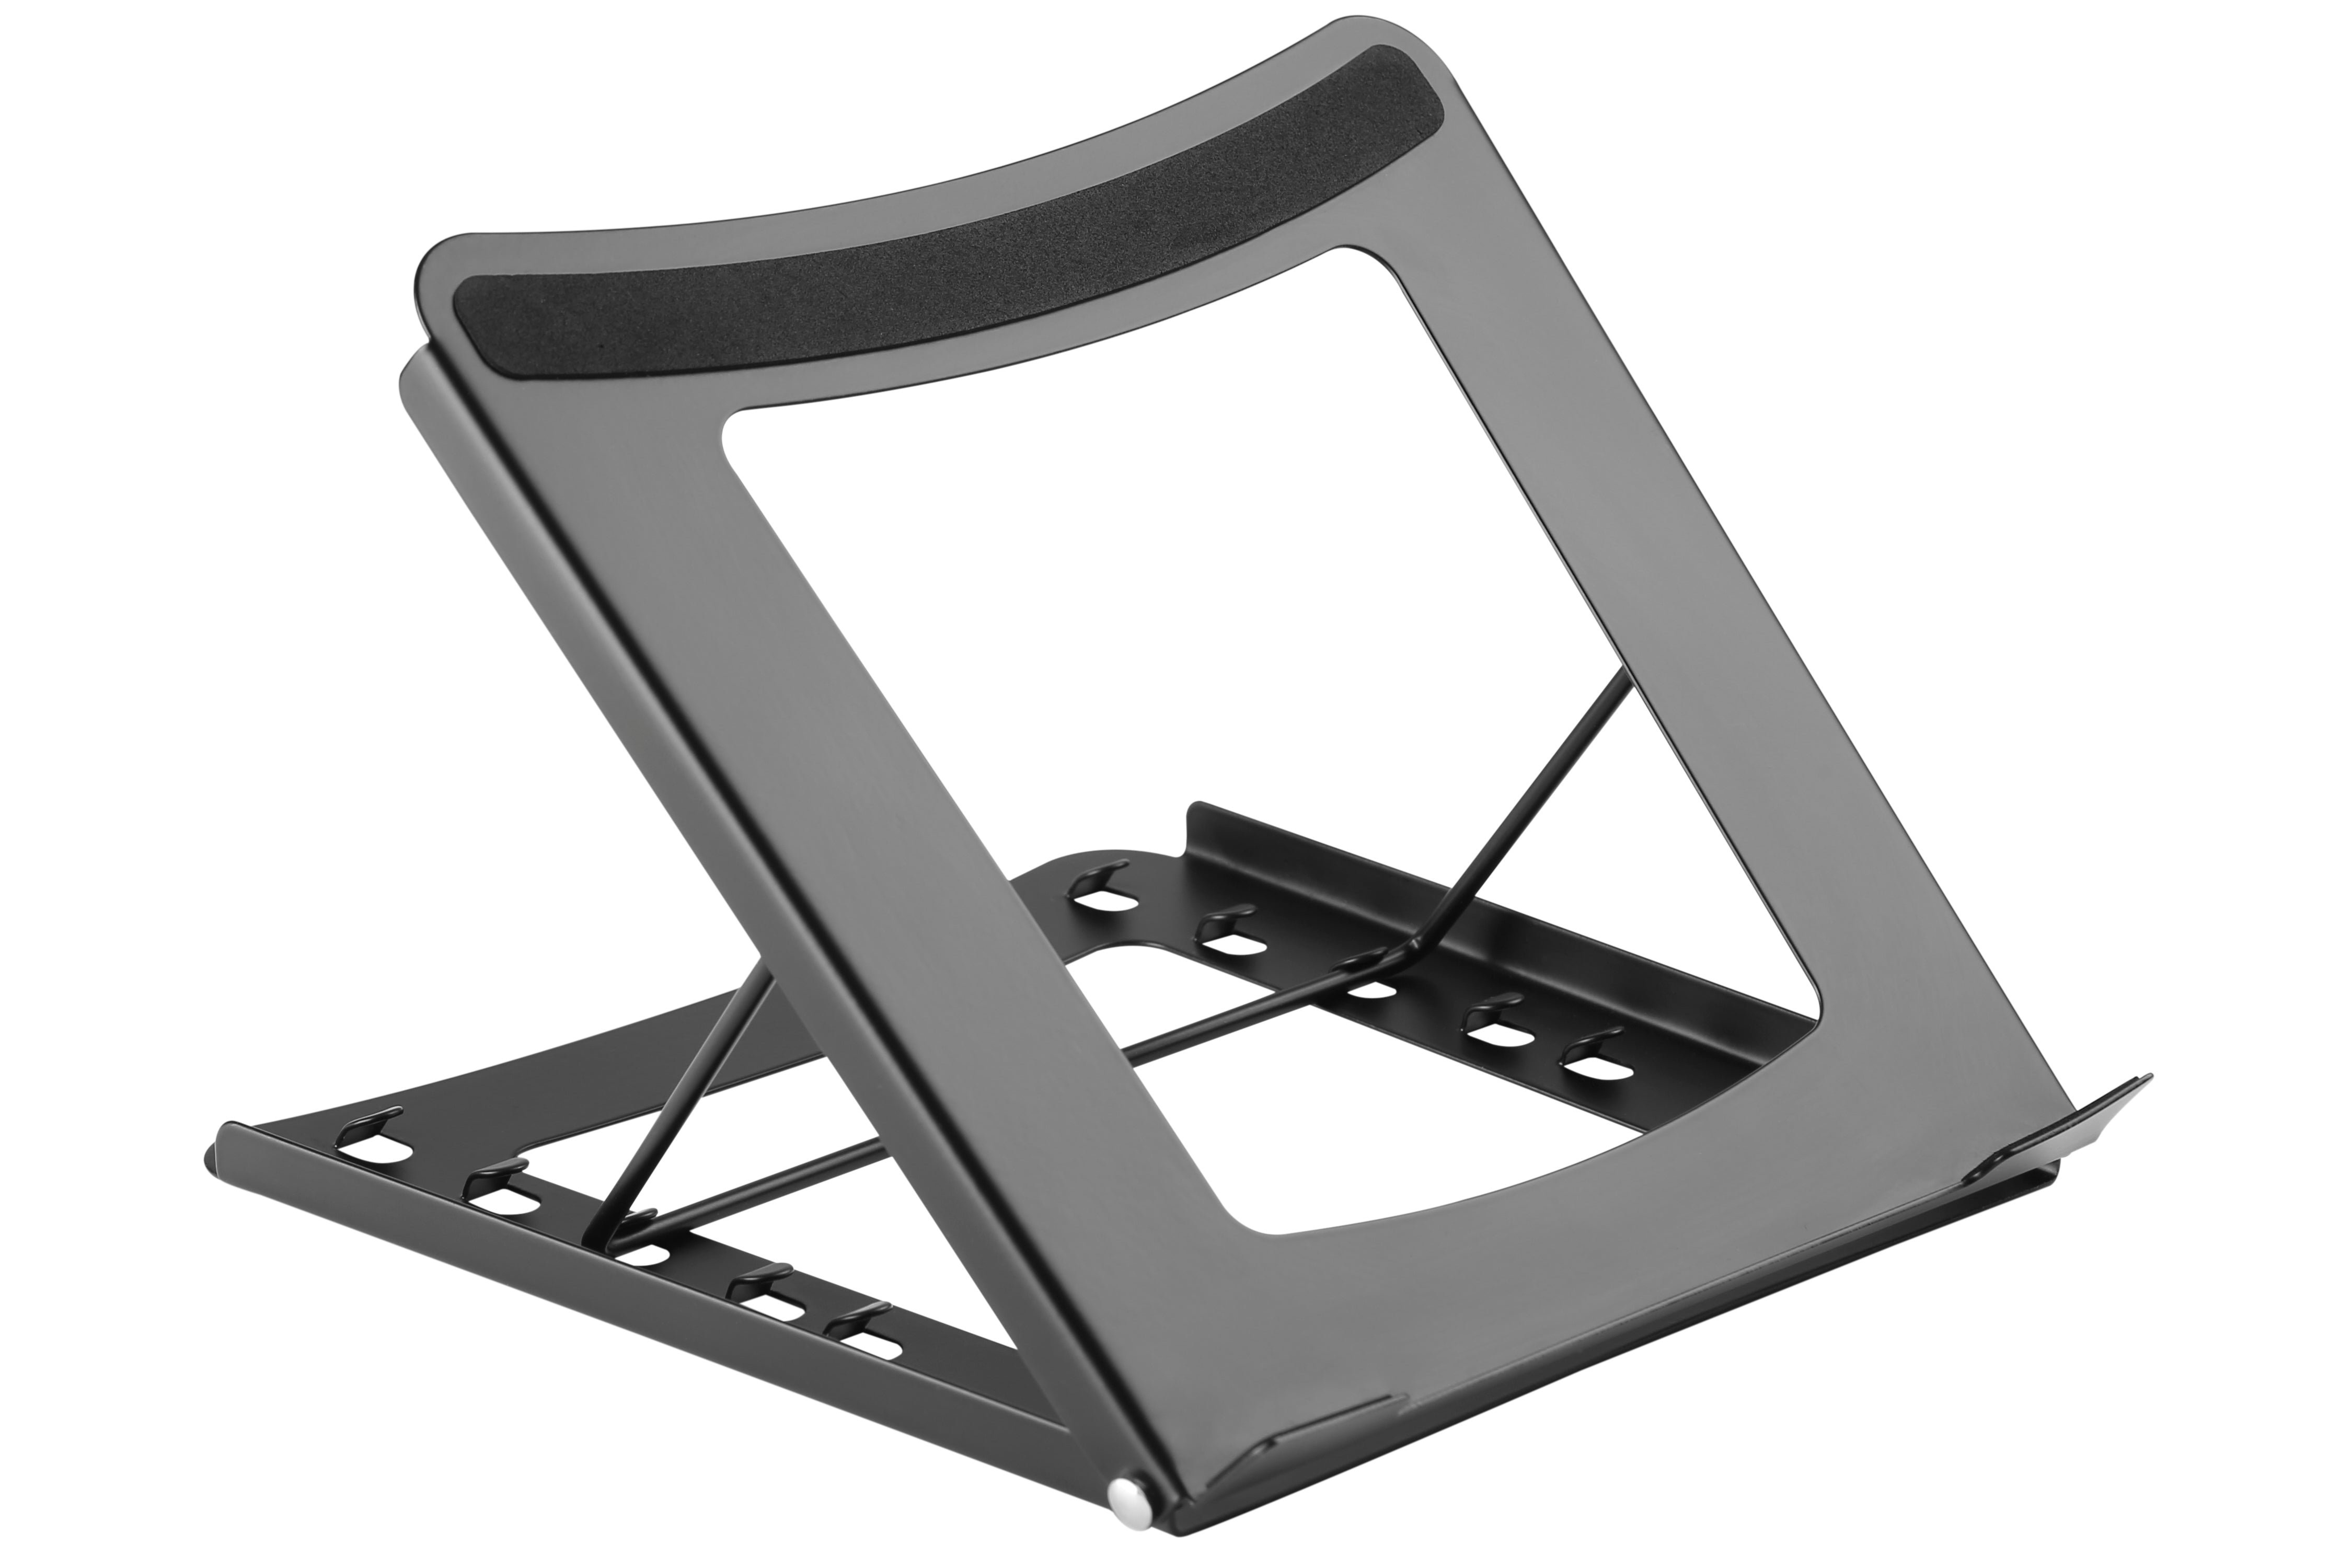 ProperAV Steel Construction Laptop or Tablet Stand with 5 Adjustable Settings (Black)